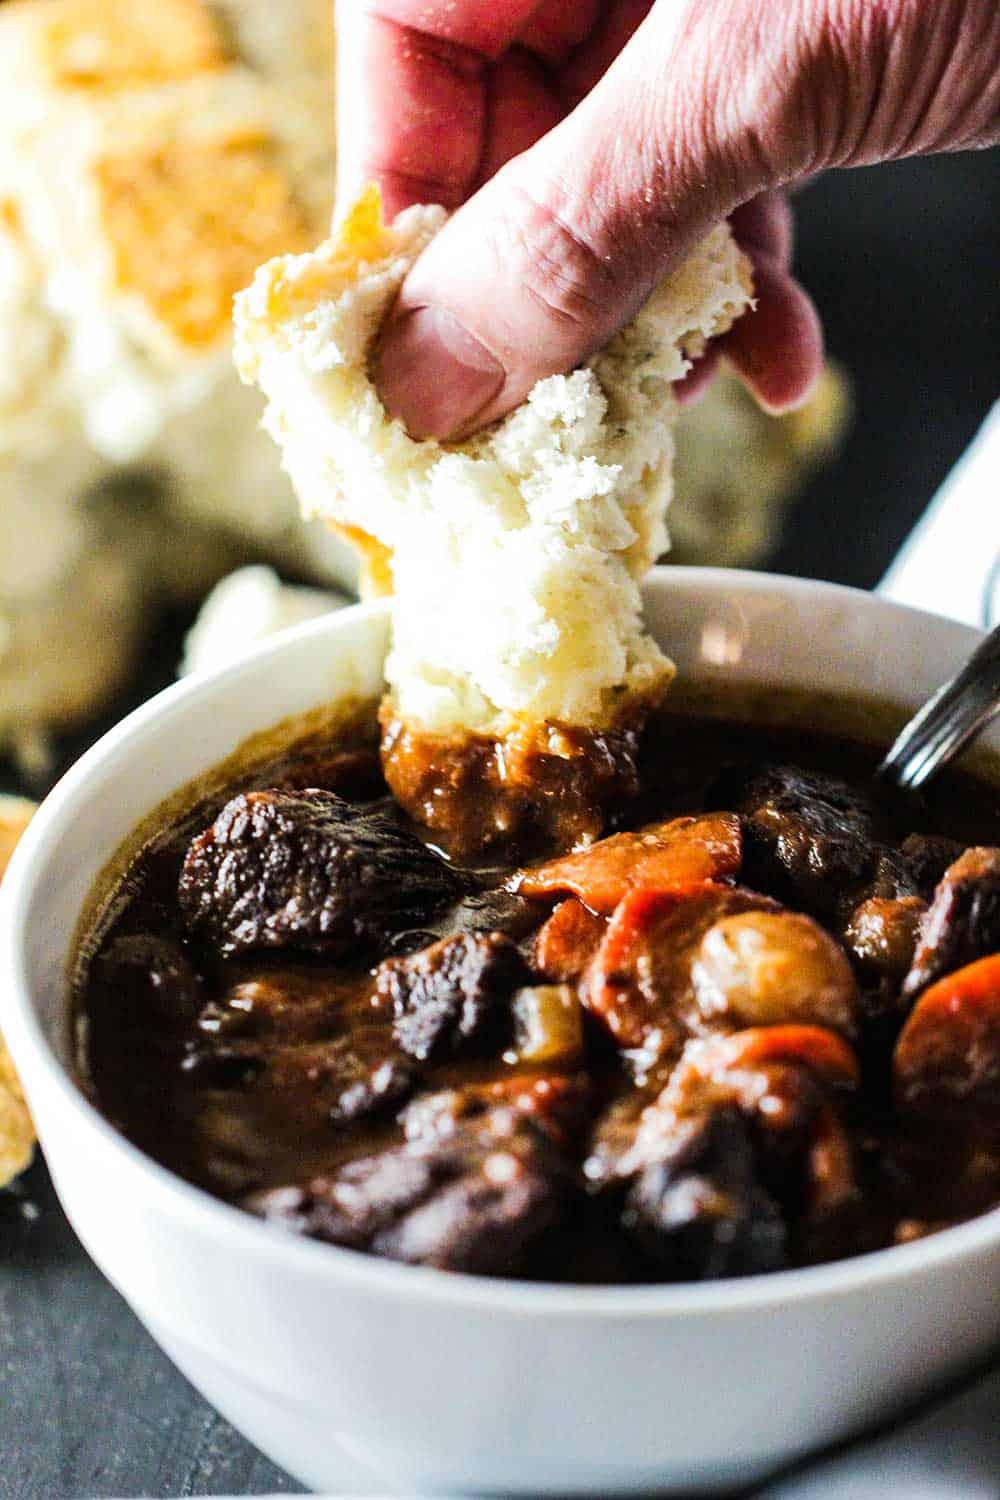 A hand dunking a torn piece of white bread into a bowl of hearty beef stew. 